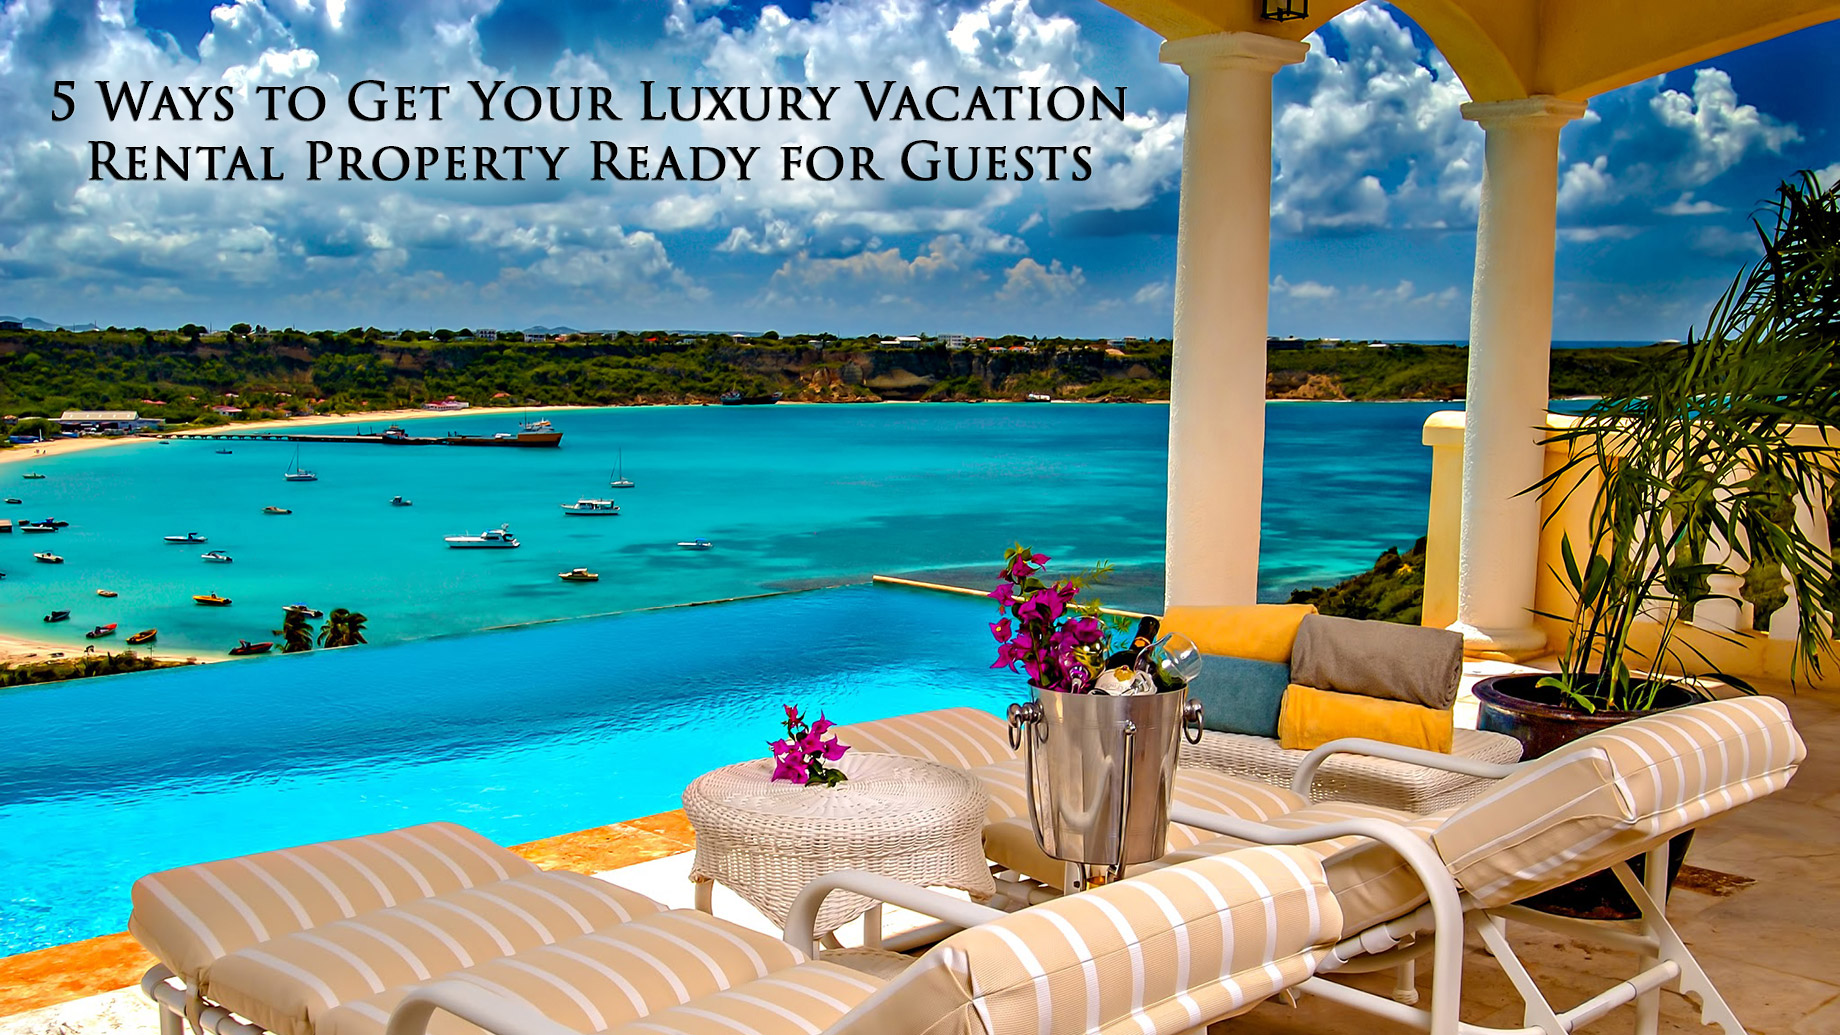 Above and Beyond – 5 Ways to Get Your Luxury Vacation Rental Property Ready for Guests